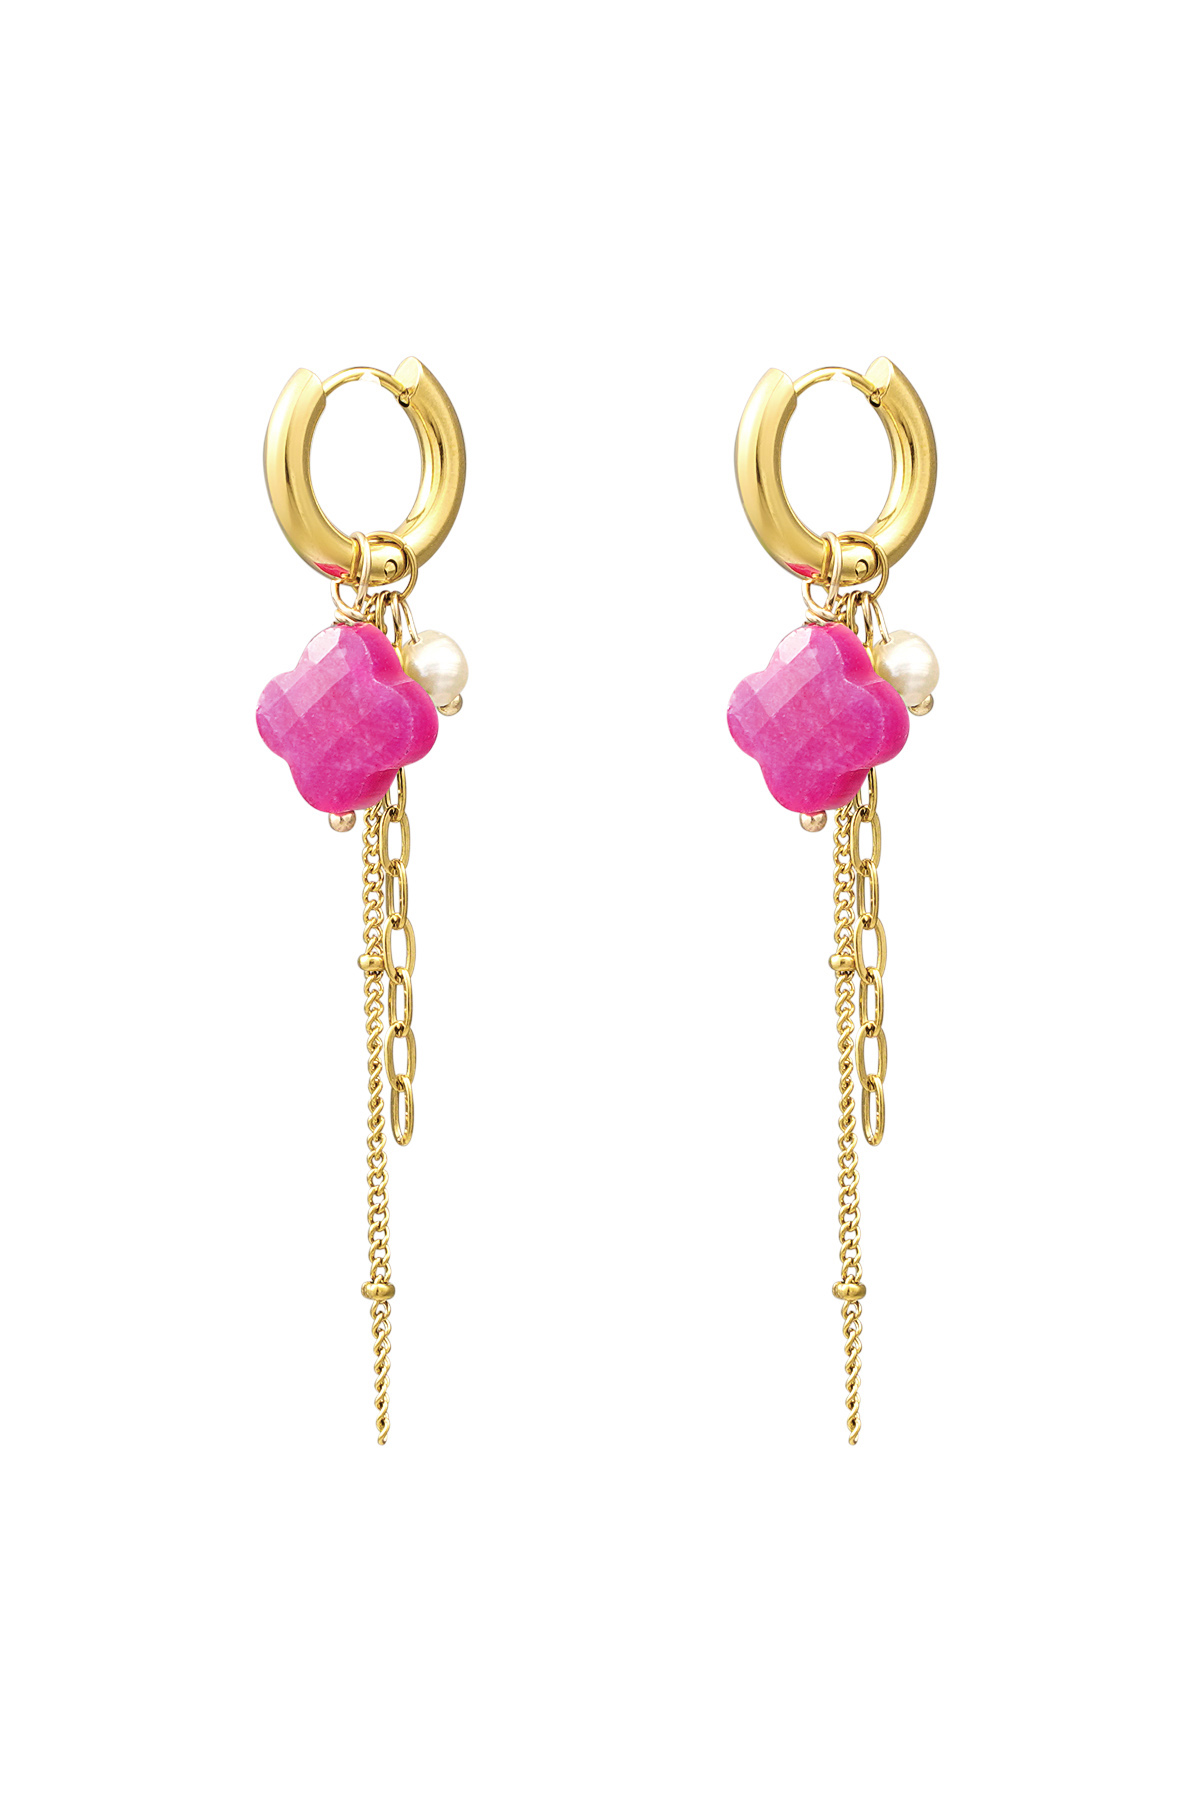 Clover earrings with chains - gold/fuchsia h5 